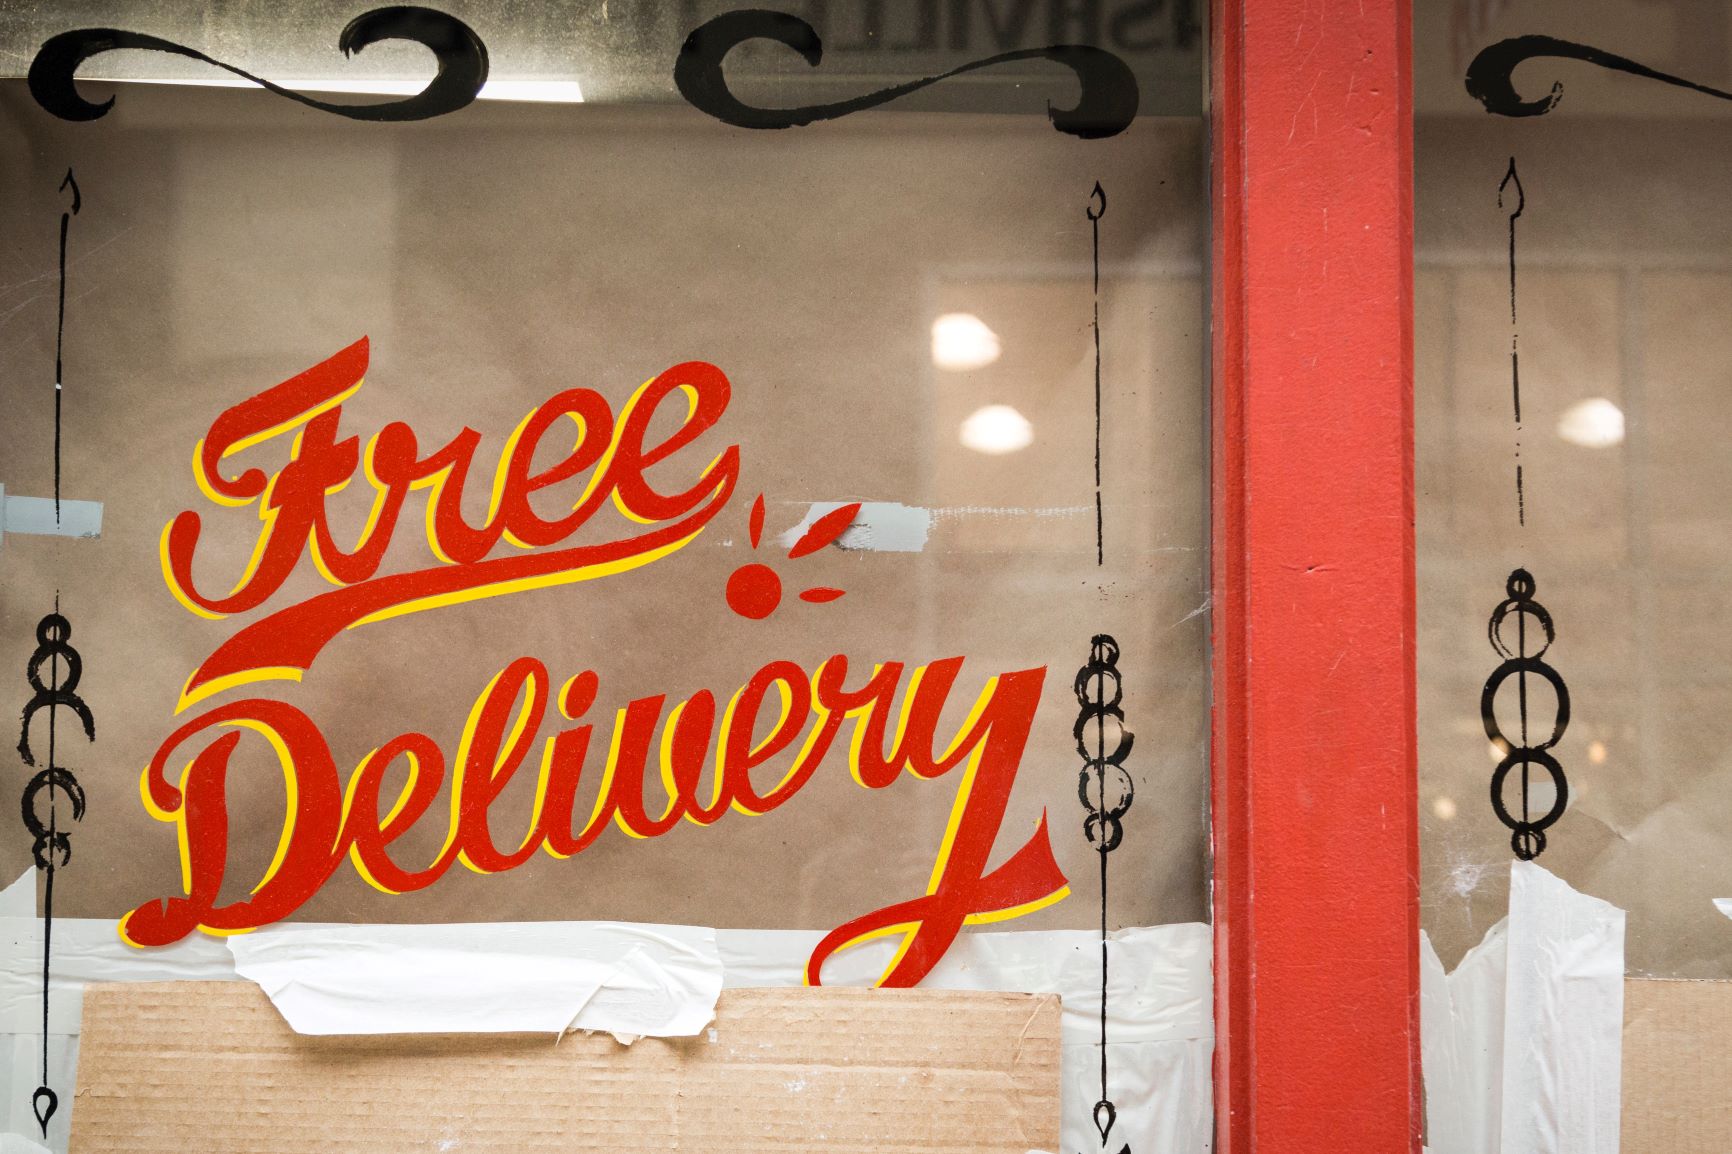 Free delivery sticker on window